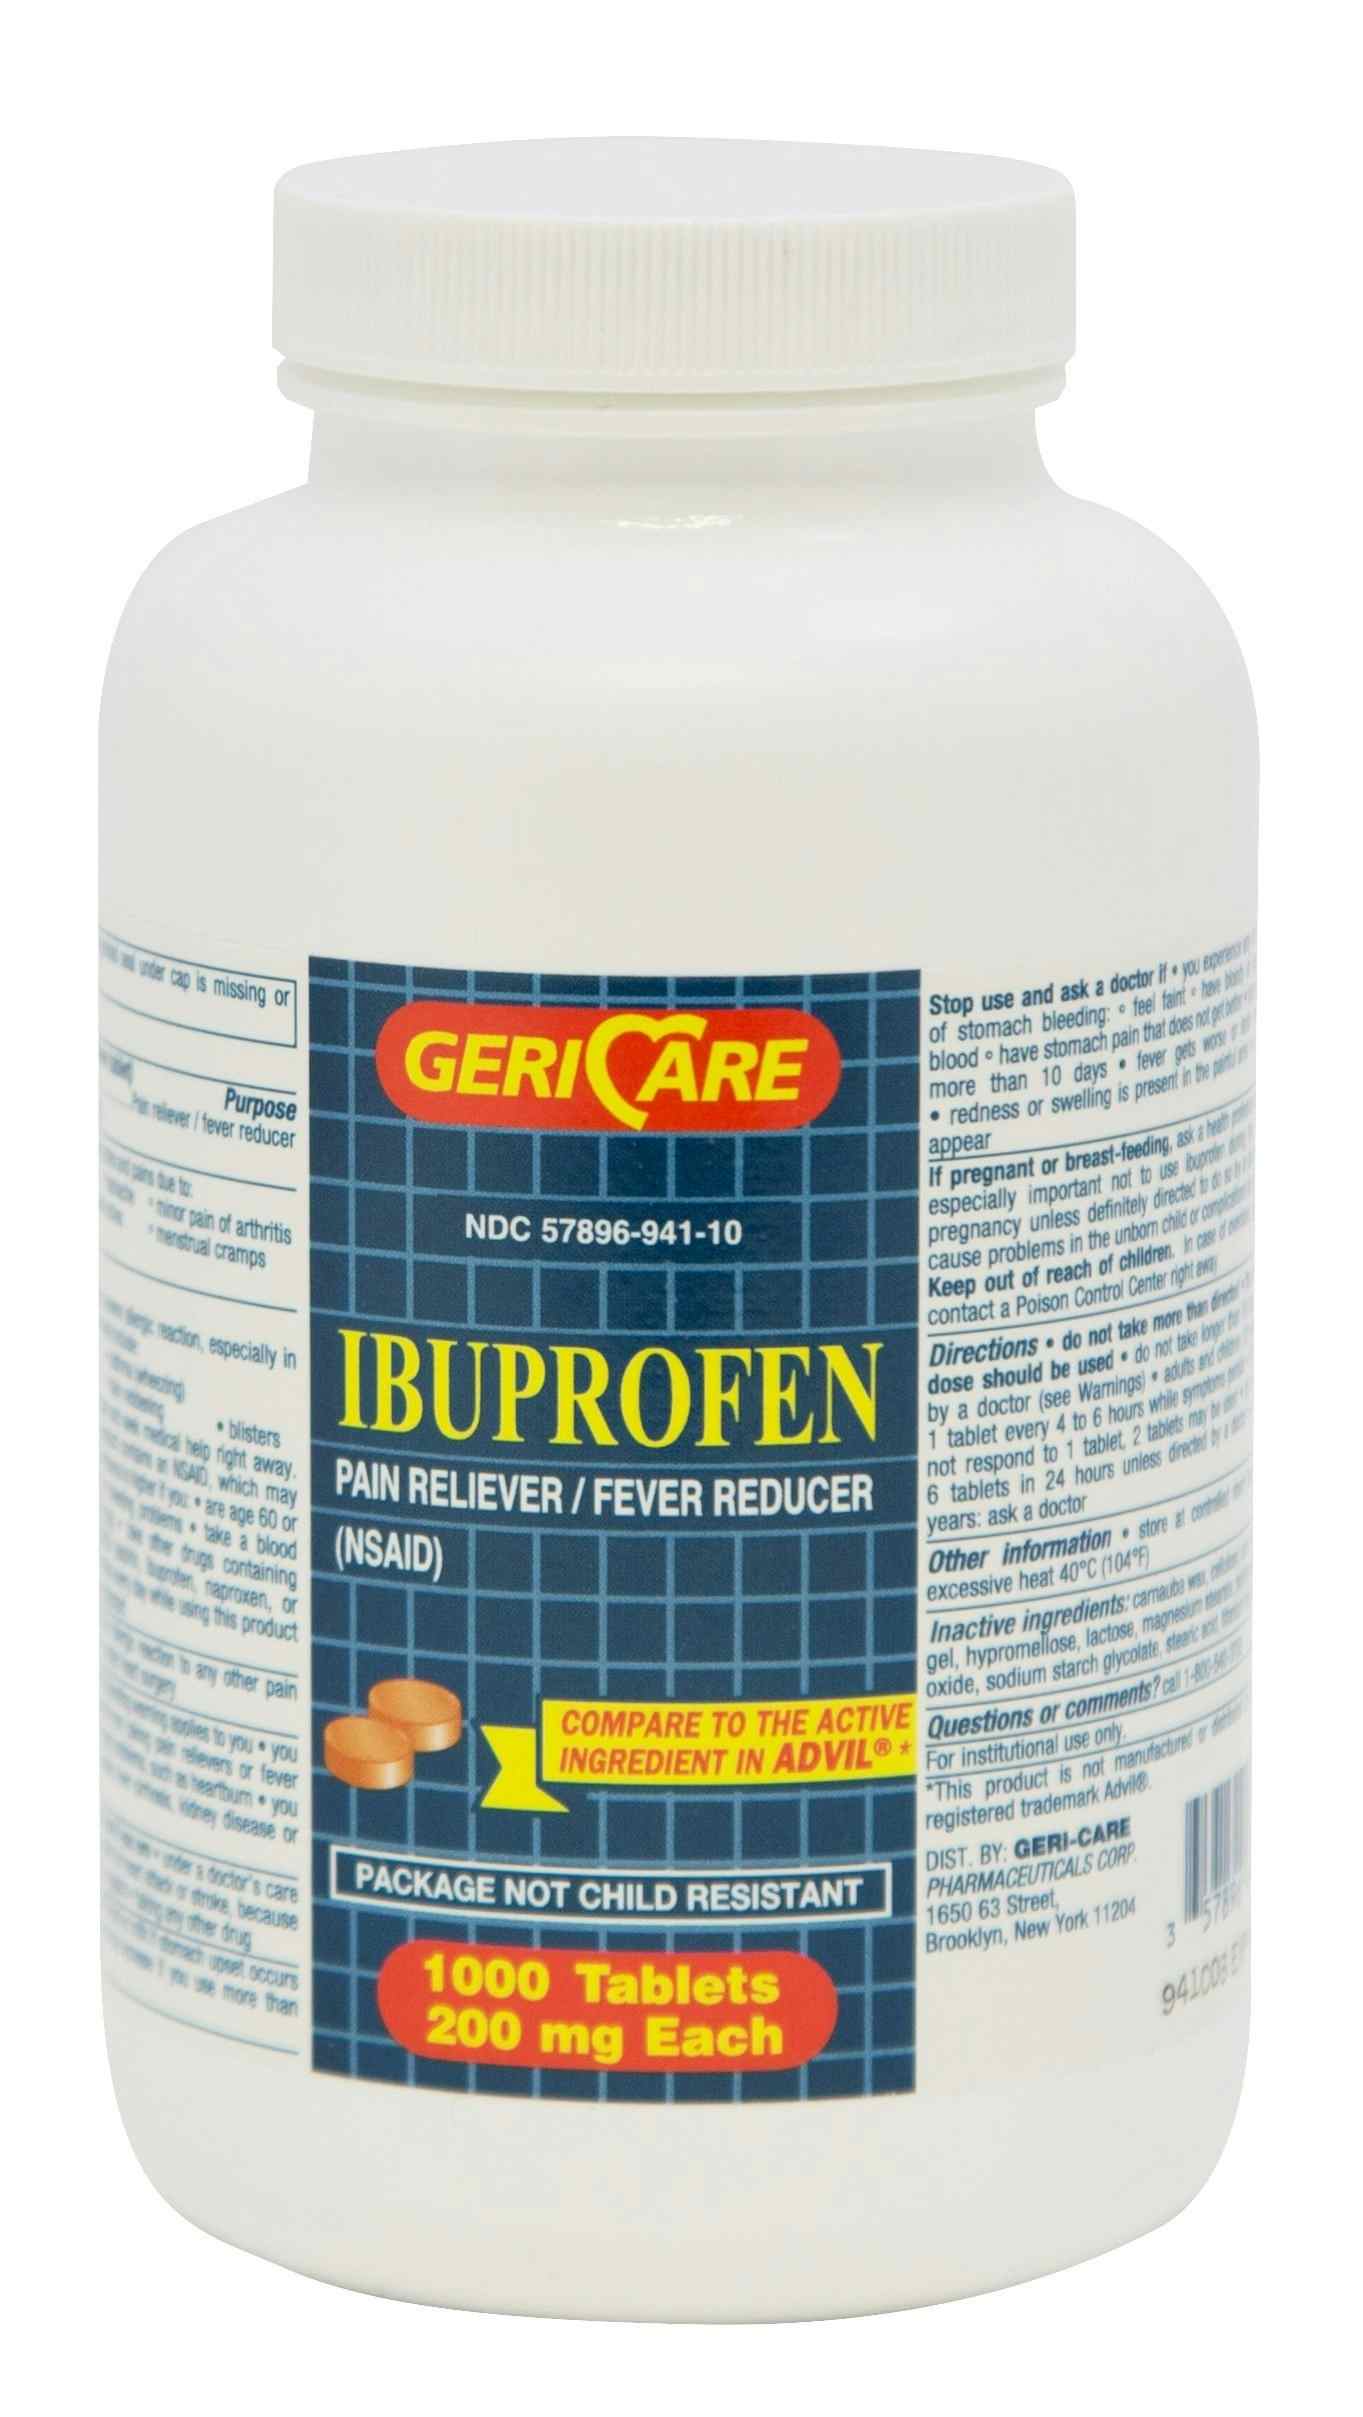 Geri-Care Ibuprofen Pain Reliever/Fever Reducer, 200 mg, 941-10-GCP, 1,000 Tablets - 1 Bottle